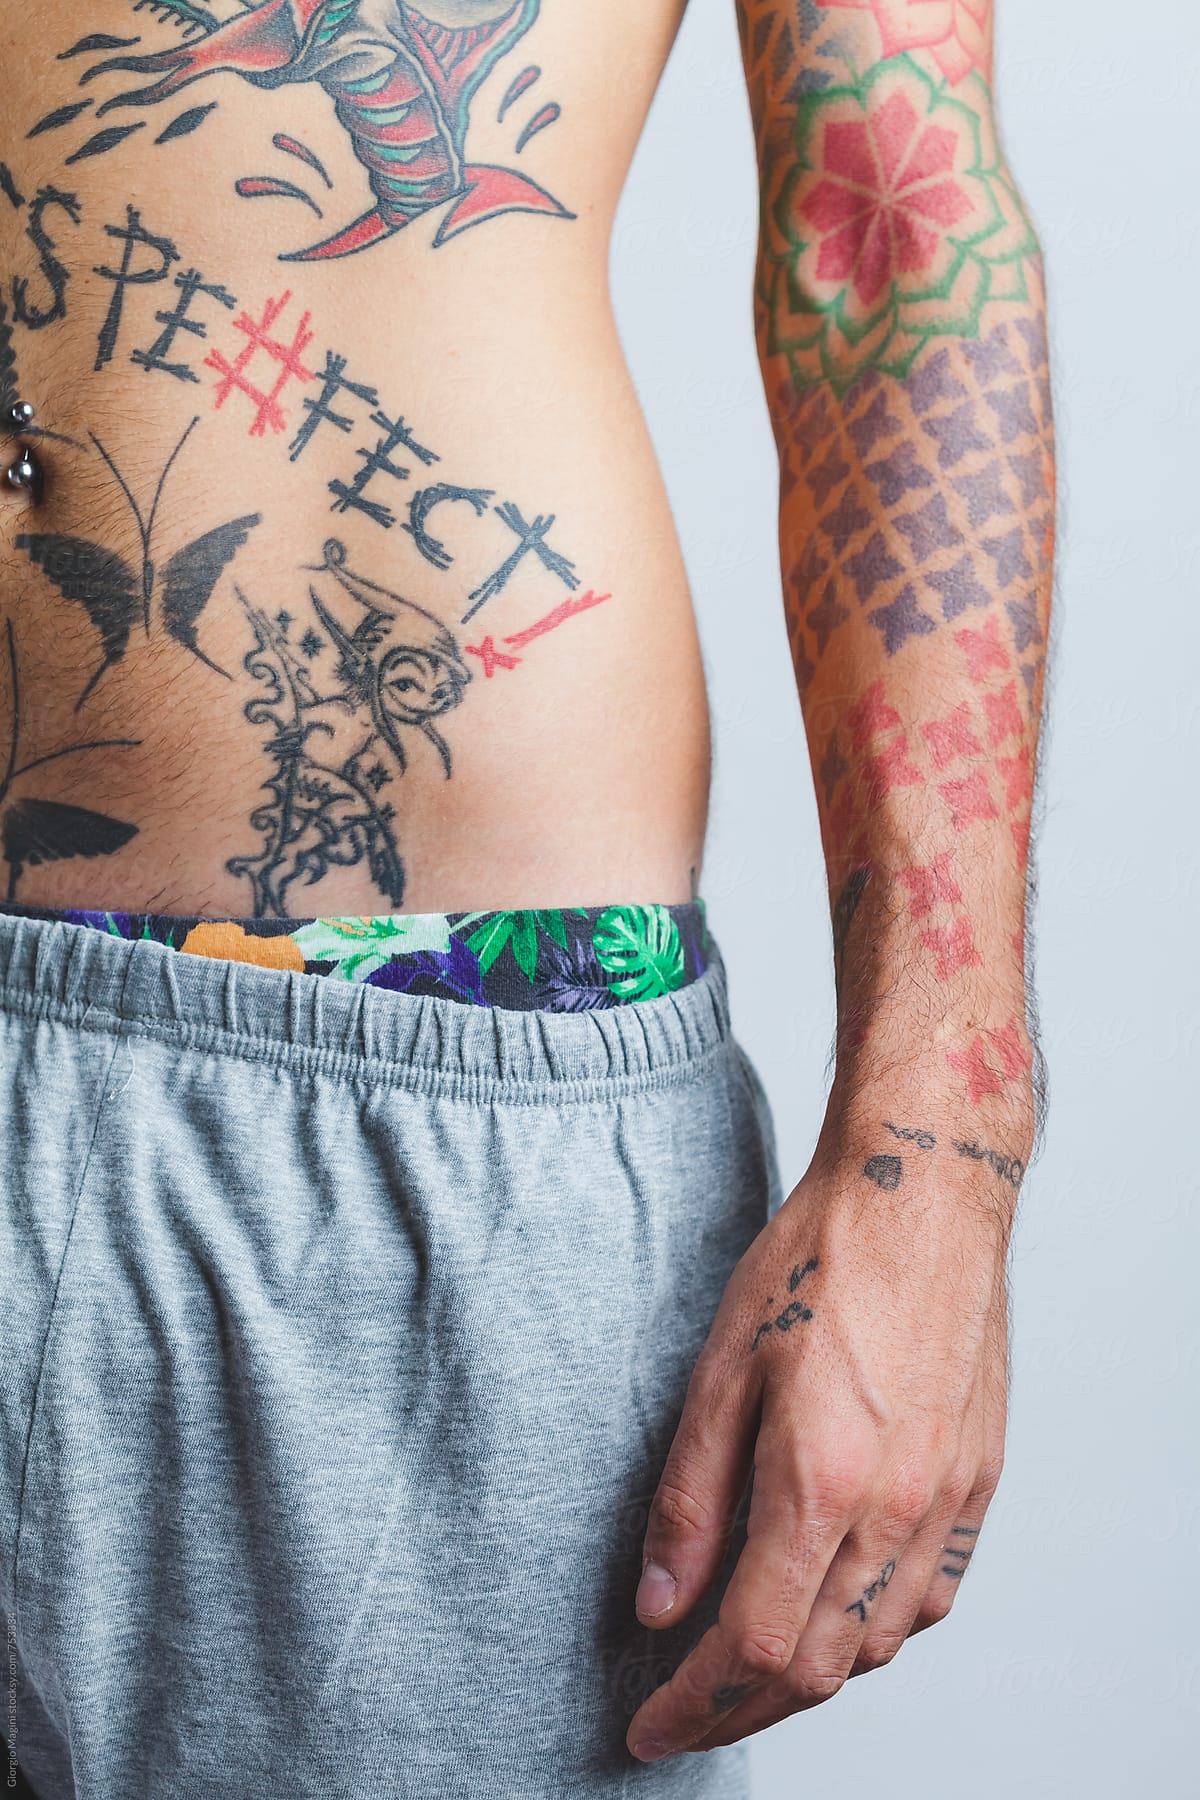 Many Tattoos On The Body Of A Young Man